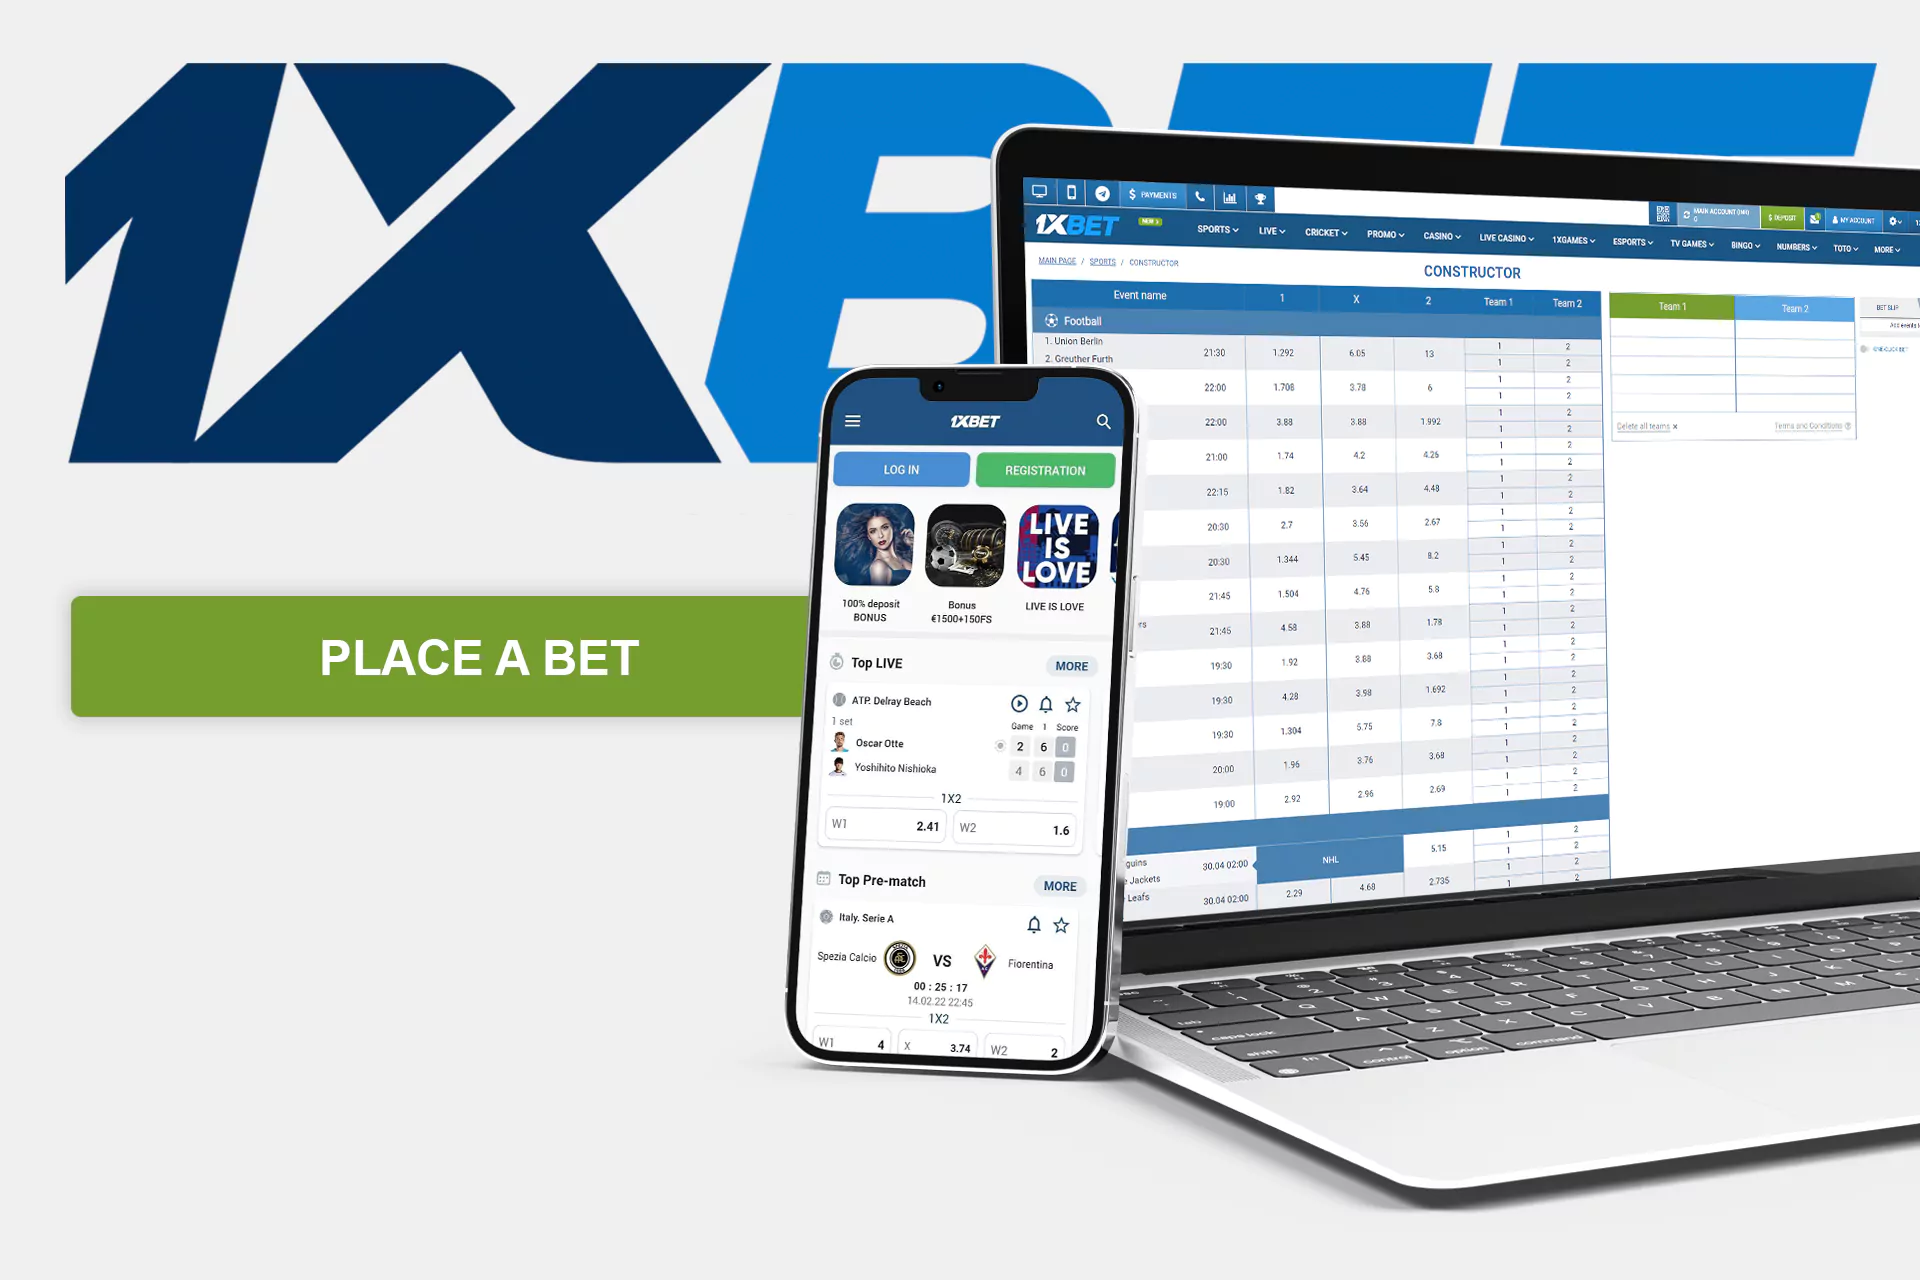 1xBet bet constructor helps to create a bet on several disciplines simultaneously.